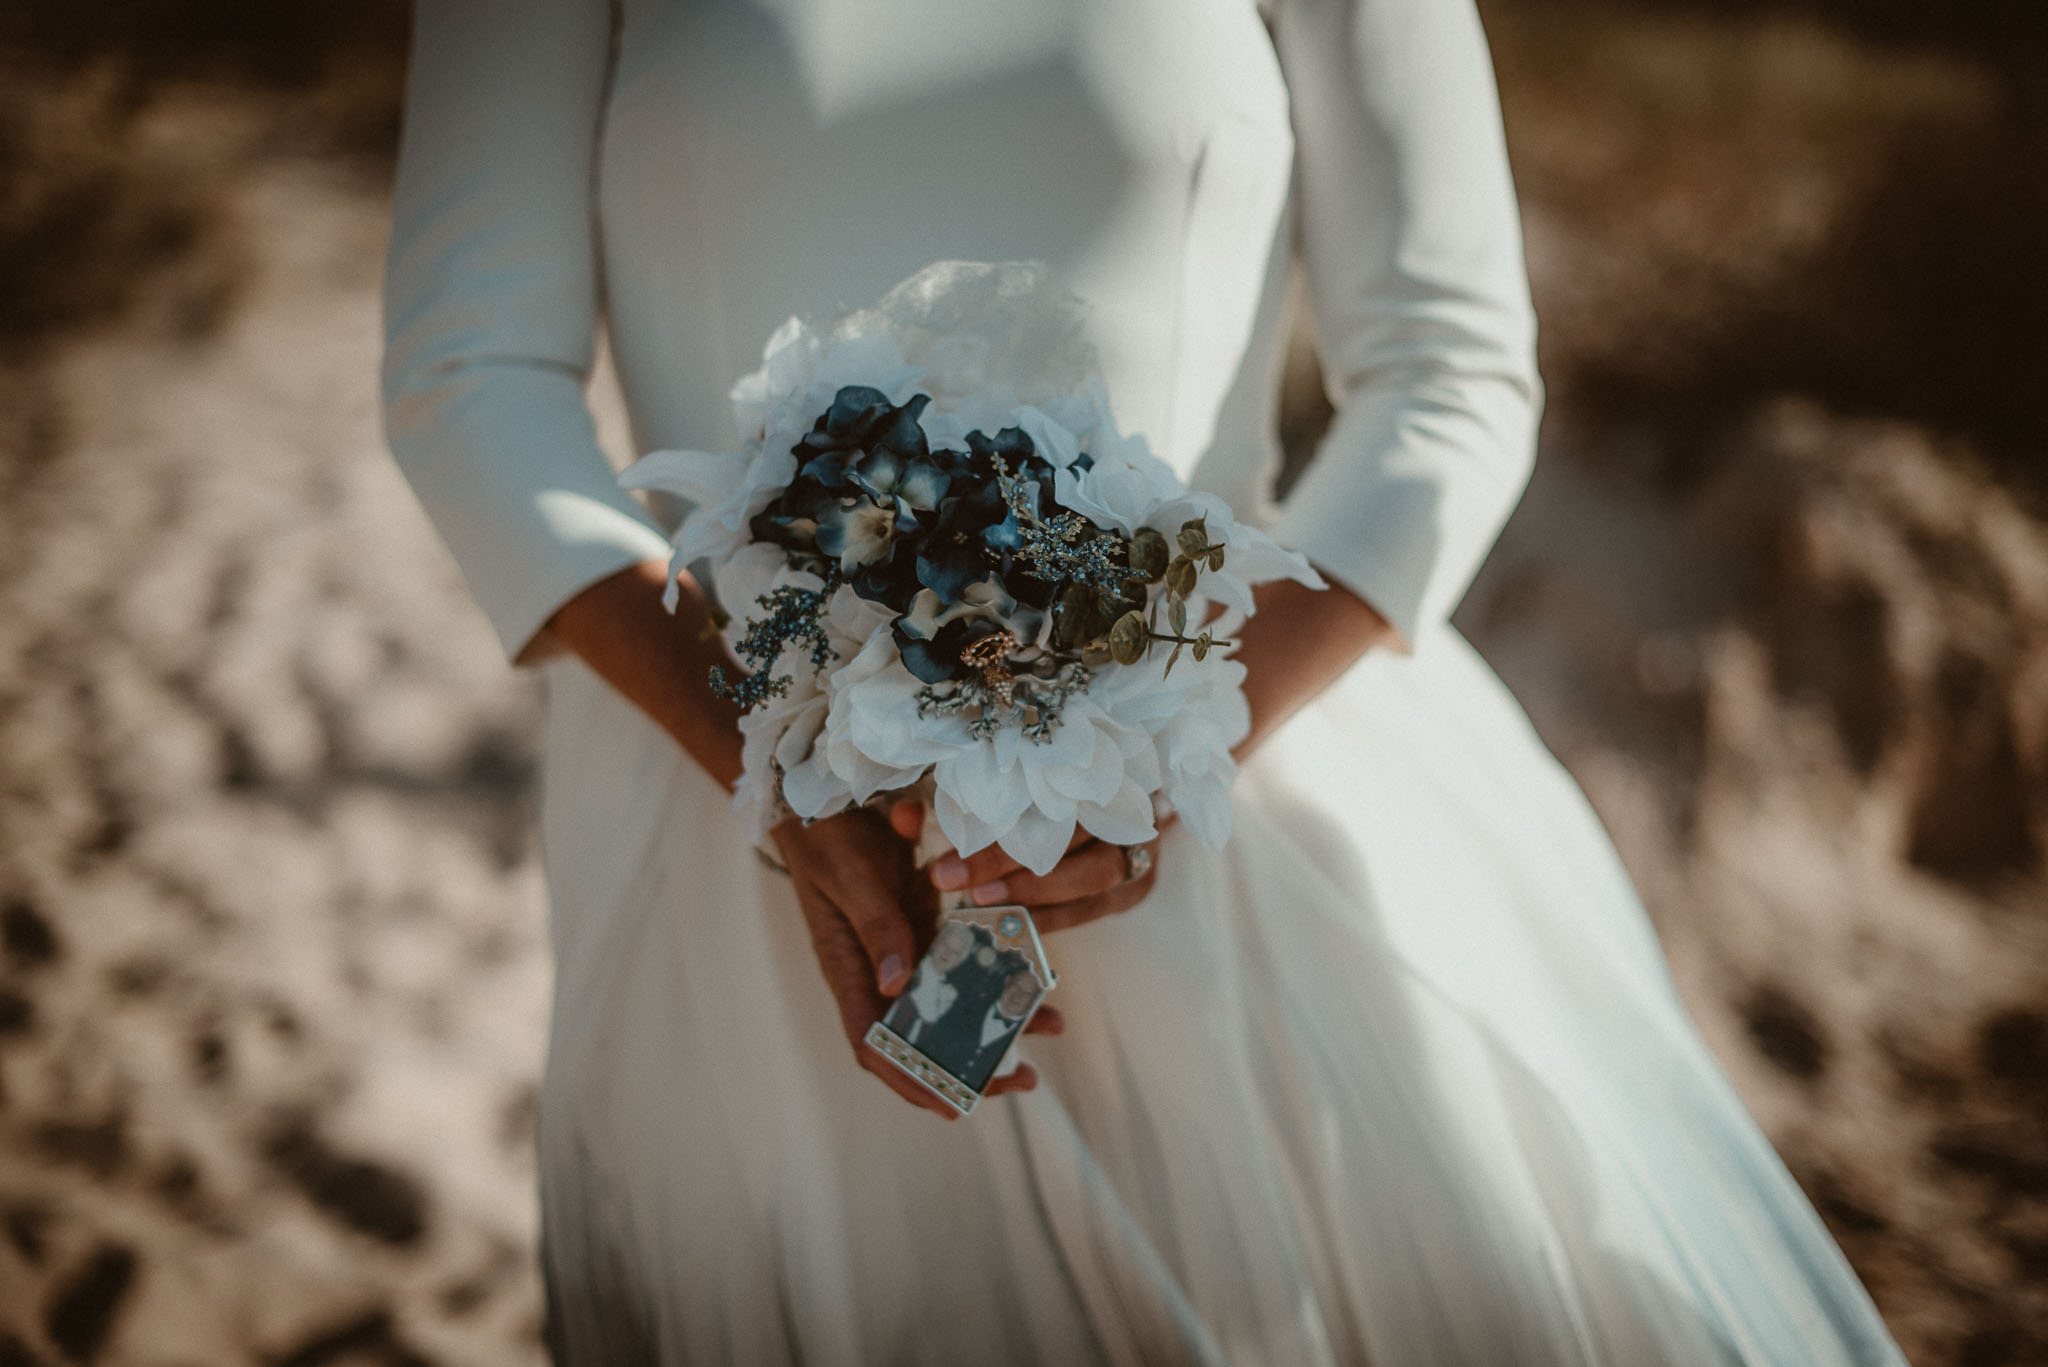 Bridal bouquet held in brides hands with photo of her late grandparents attached.   